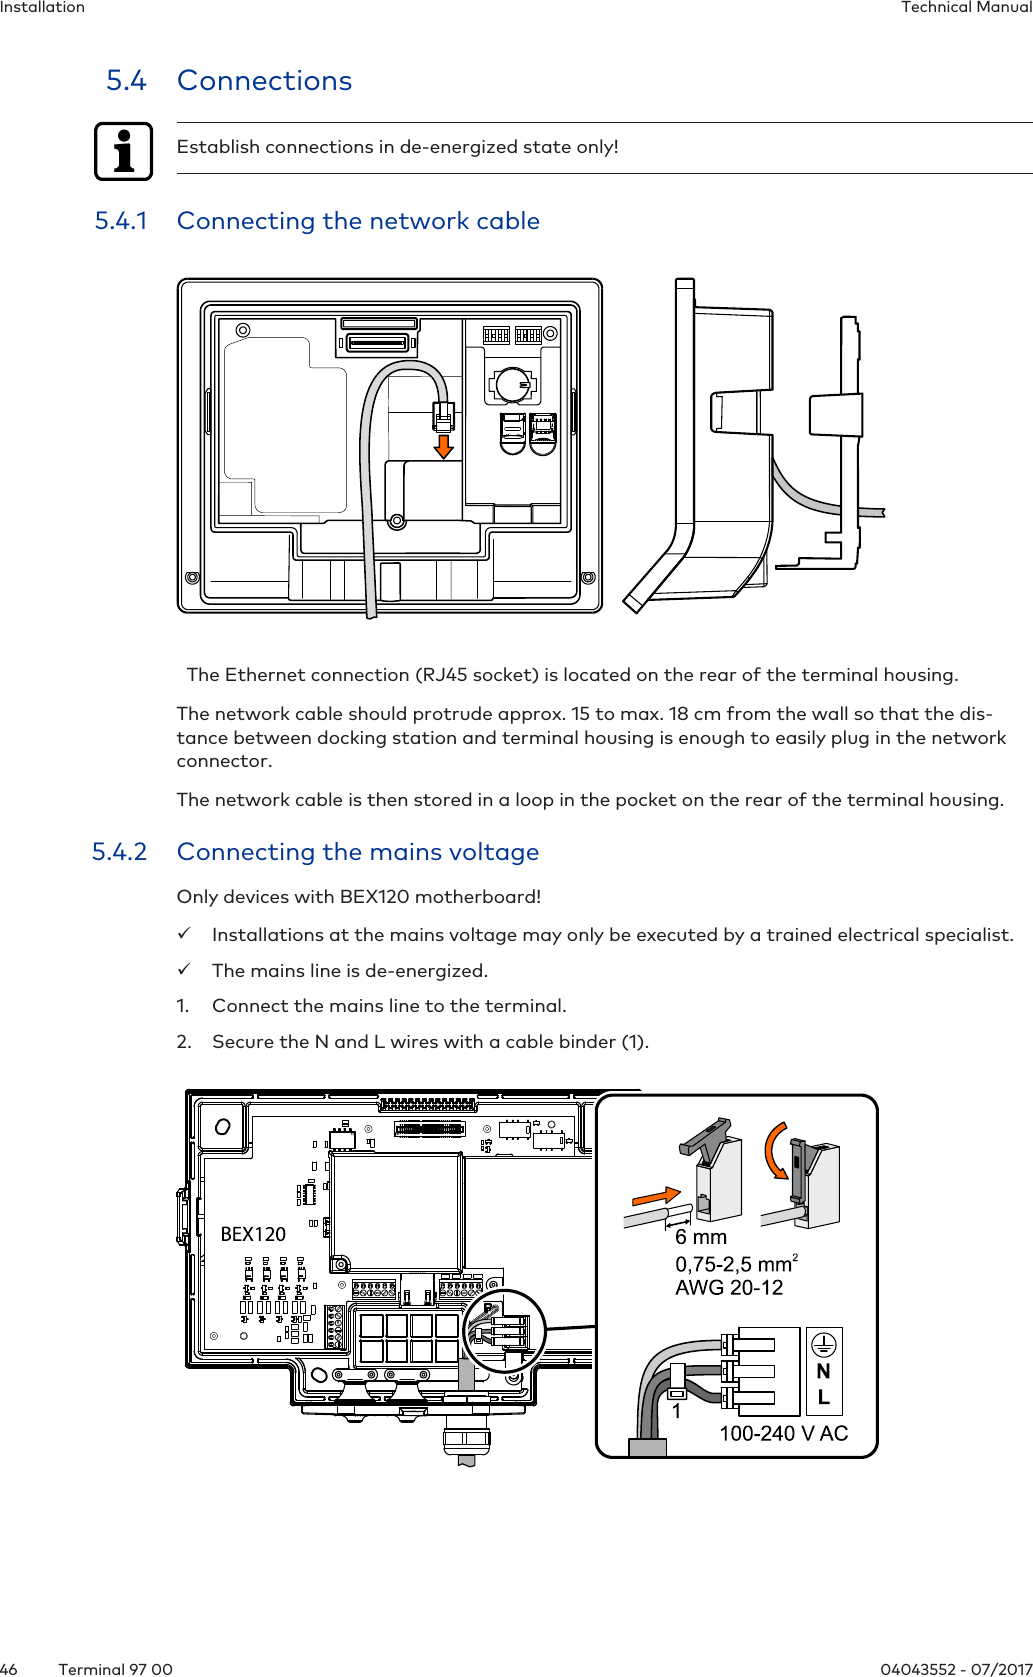 Installation Technical Manual46 04043552 - 07/2017Terminal 97 005.4 ConnectionsEstablish connections in de-energized state only!5.4.1 Connecting the network cable  The Ethernet connection (RJ45 socket) is located on the rear of the terminal housing.The network cable should protrude approx. 15 to max. 18 cm from the wall so that the dis-tance between docking station and terminal housing is enough to easily plug in the networkconnector.The network cable is then stored in a loop in the pocket on the rear of the terminal housing.5.4.2 Connecting the mains voltageOnly devices with BEX120 motherboard!üInstallations at the mains voltage may only be executed by a trained electrical specialist.üThe mains line is de-energized.1. Connect the mains line to the terminal.2. Secure the N and L wires with a cable binder (1).